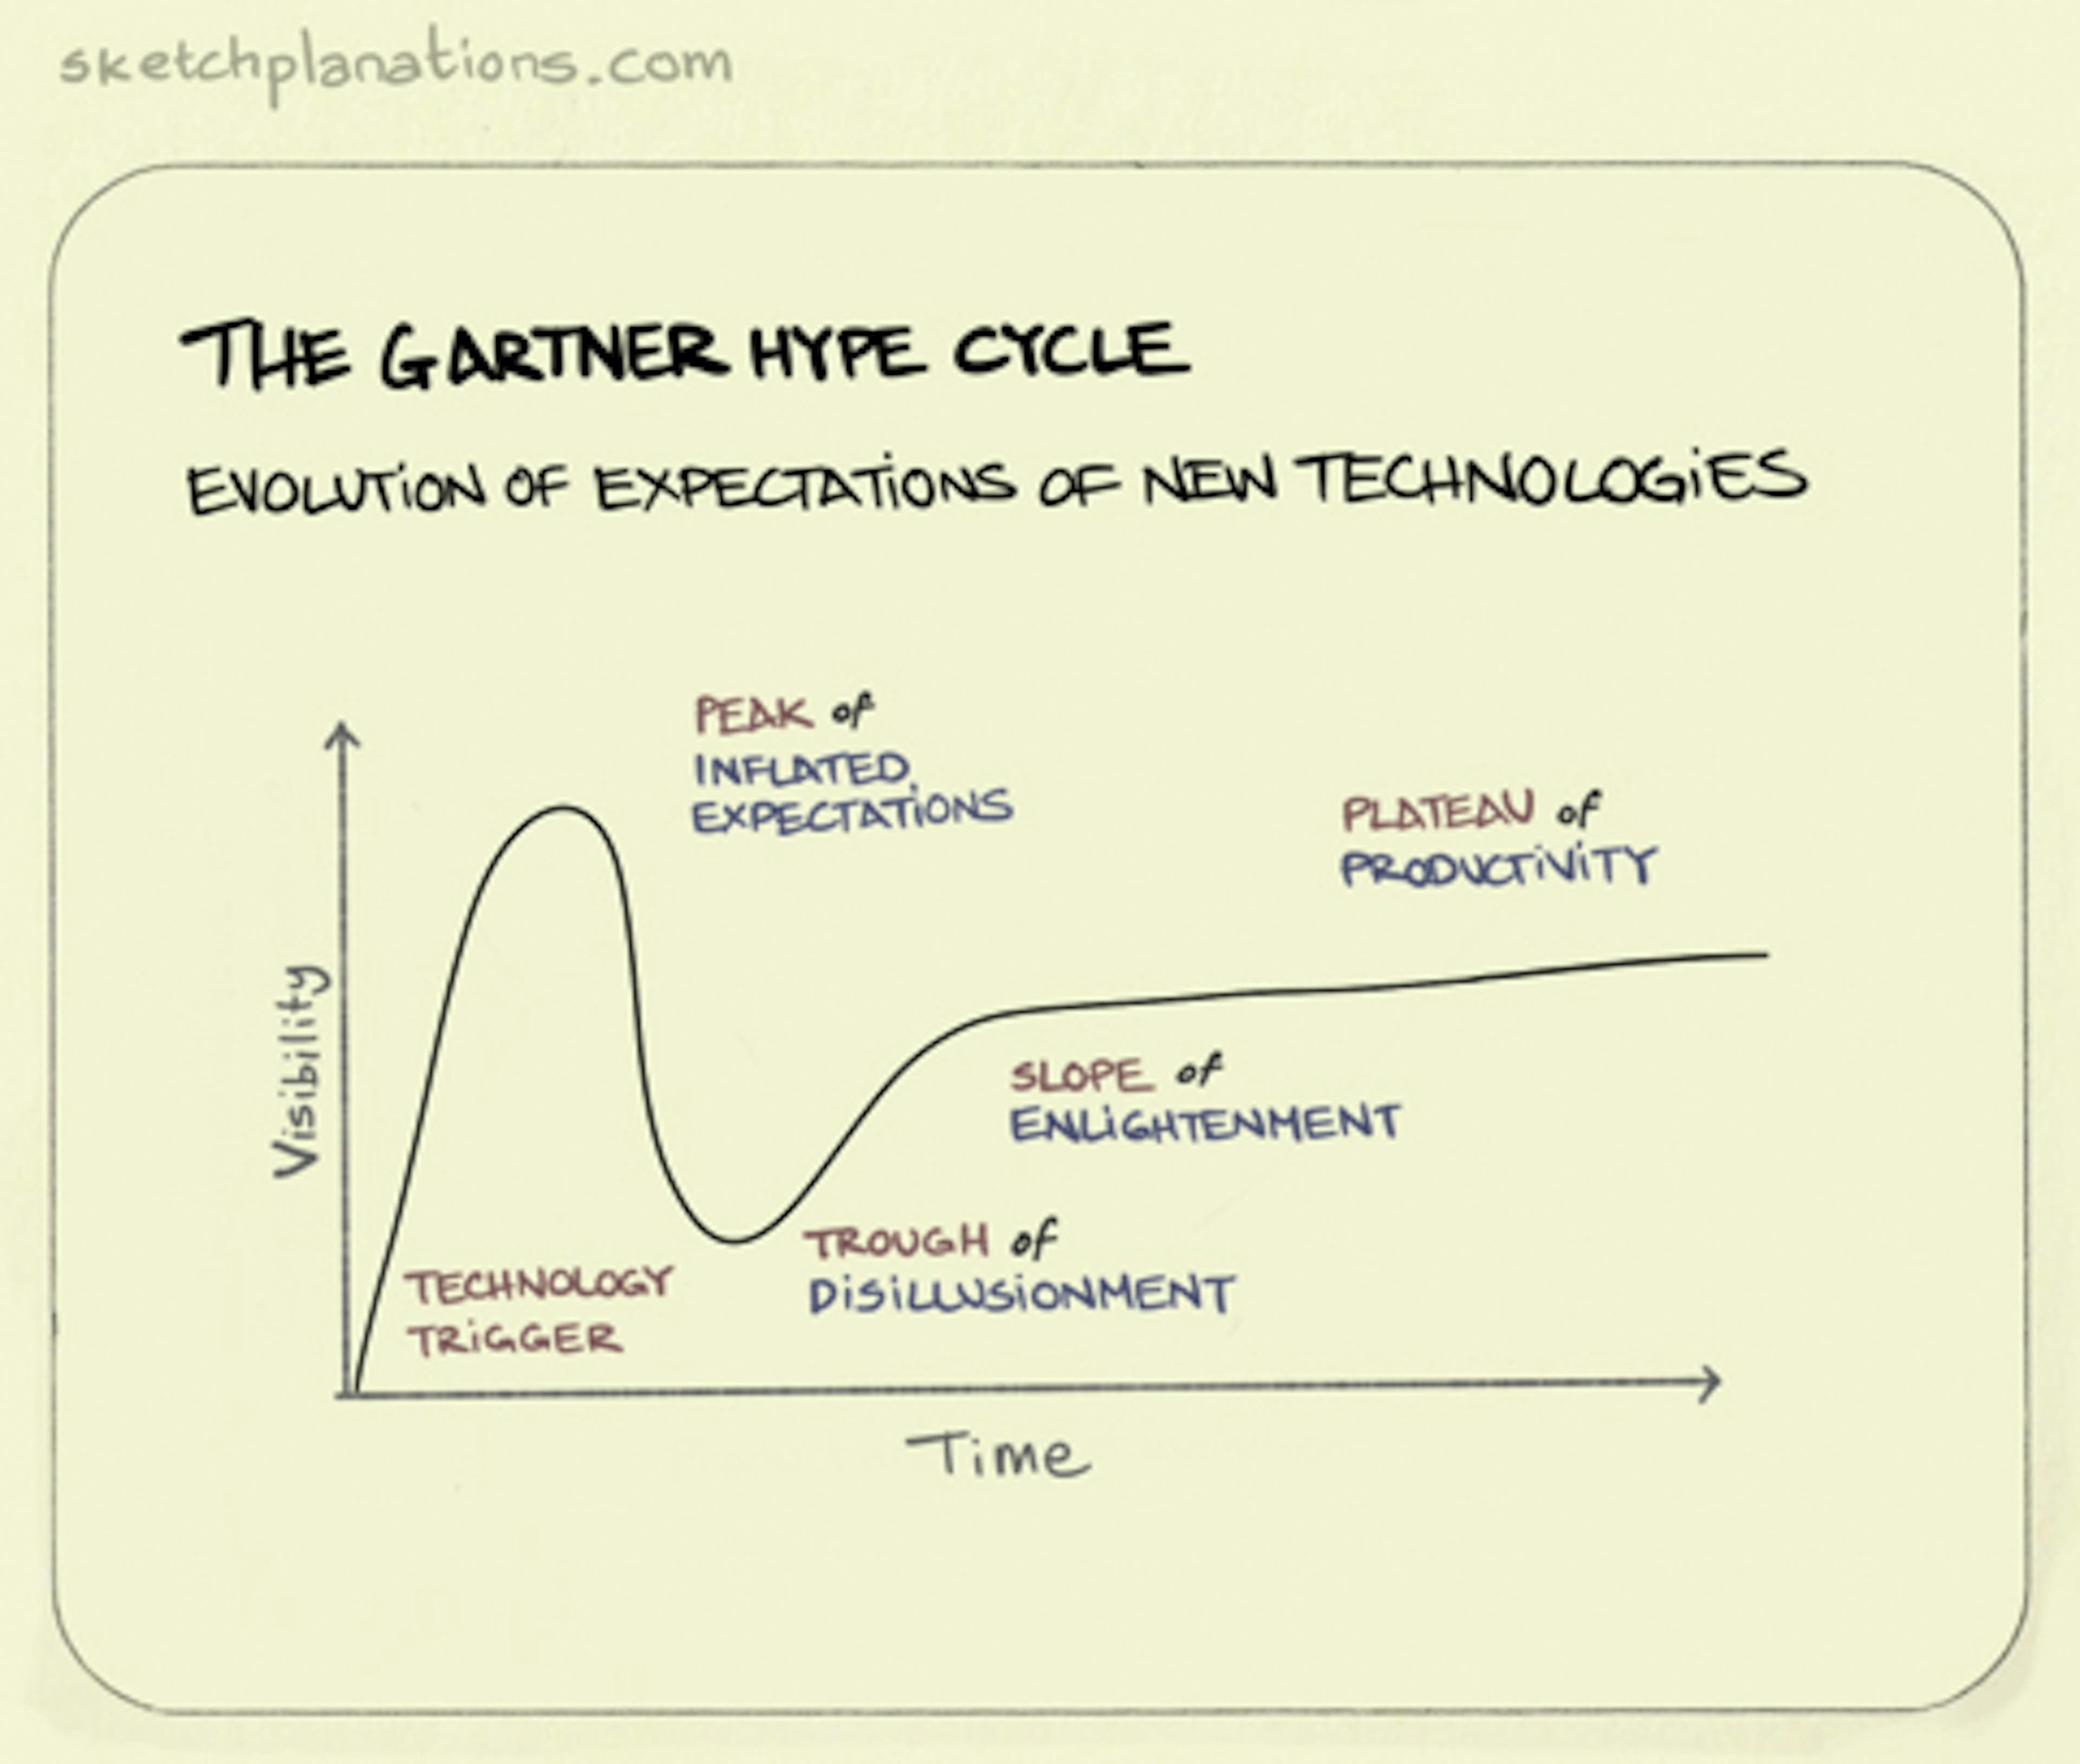 The Gartner Hype Cycle illustration: a line graph shows the typical curvy evolution of expectations from new technologies over time. 